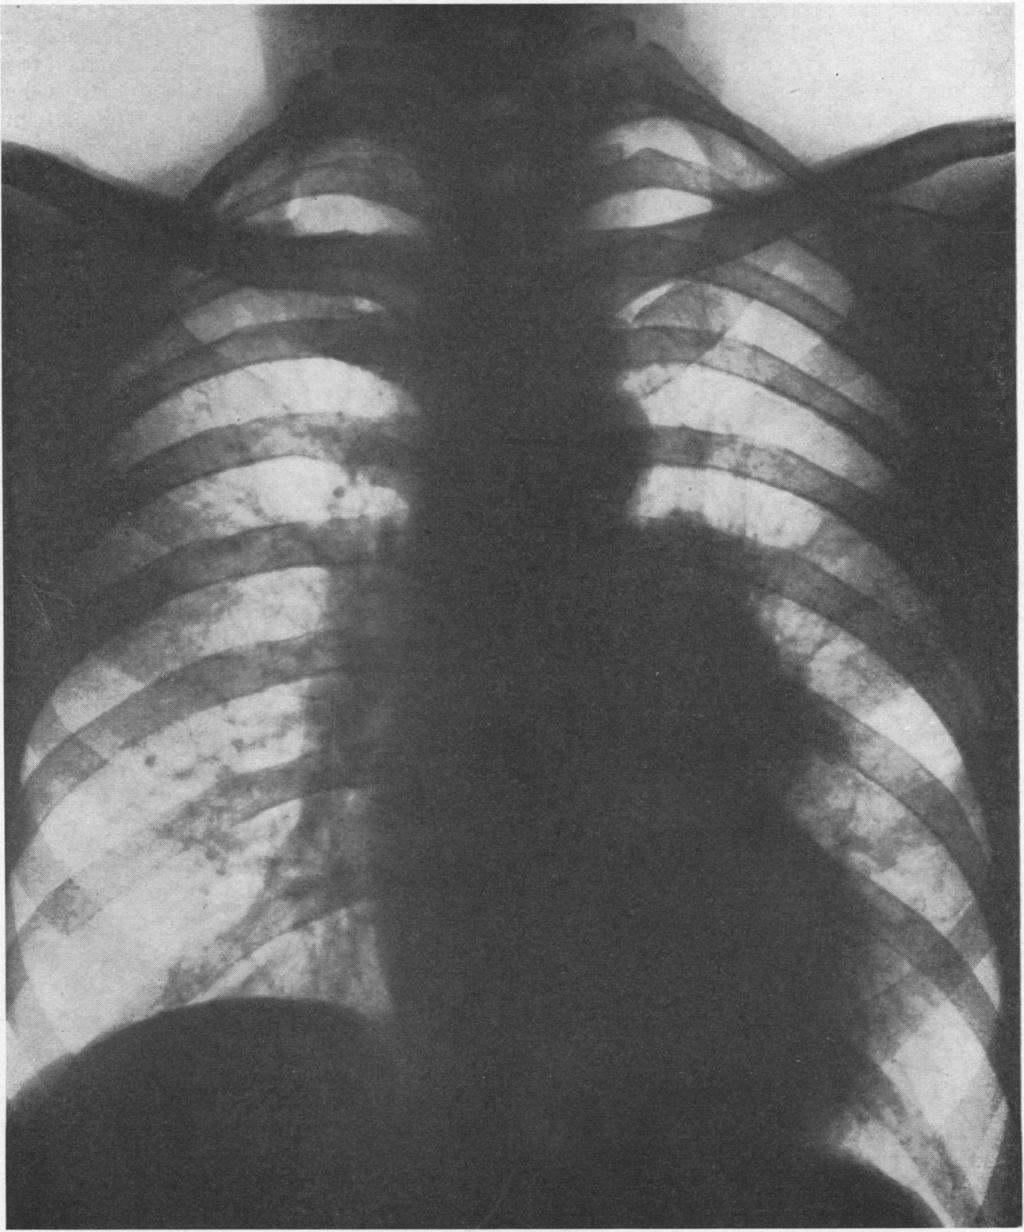 PERFORATION OF THE TRACHEA AND BRONCHUS The radiograph (Fig.